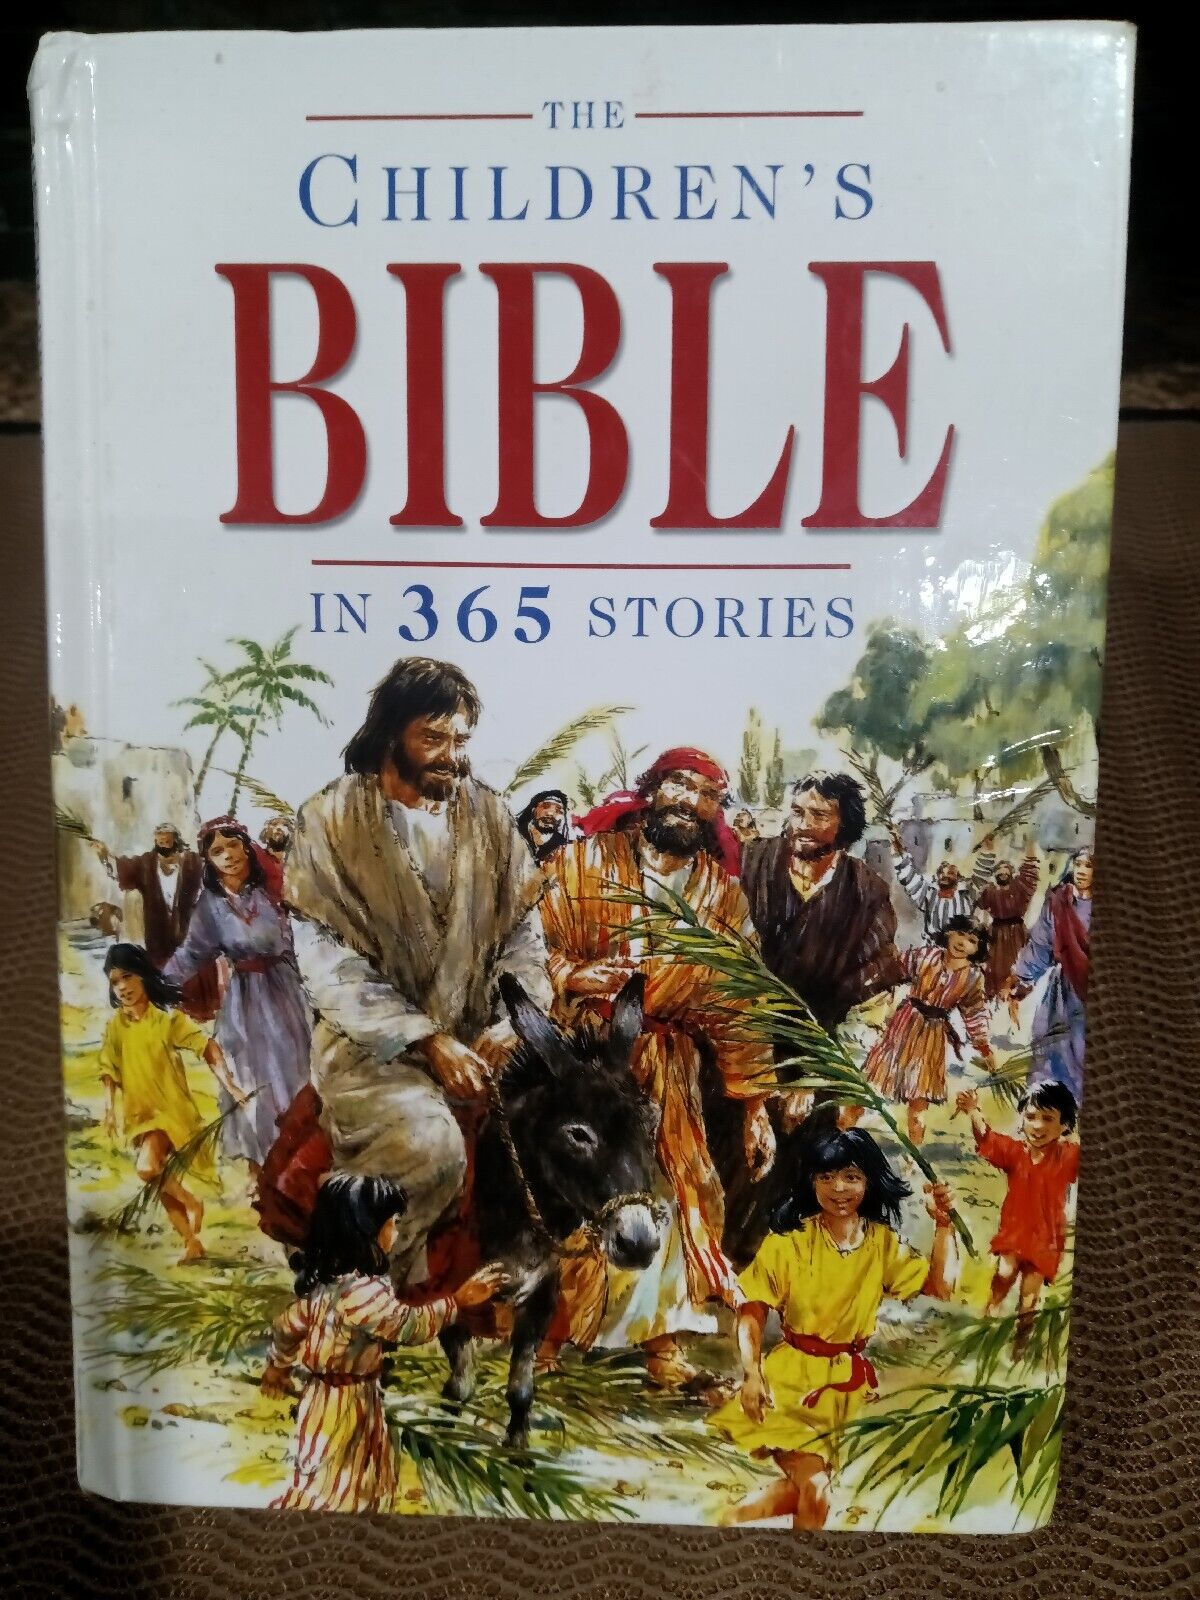 The Children's Bible in 365 Stories Hardcover – Illustrated, January 5, 1995